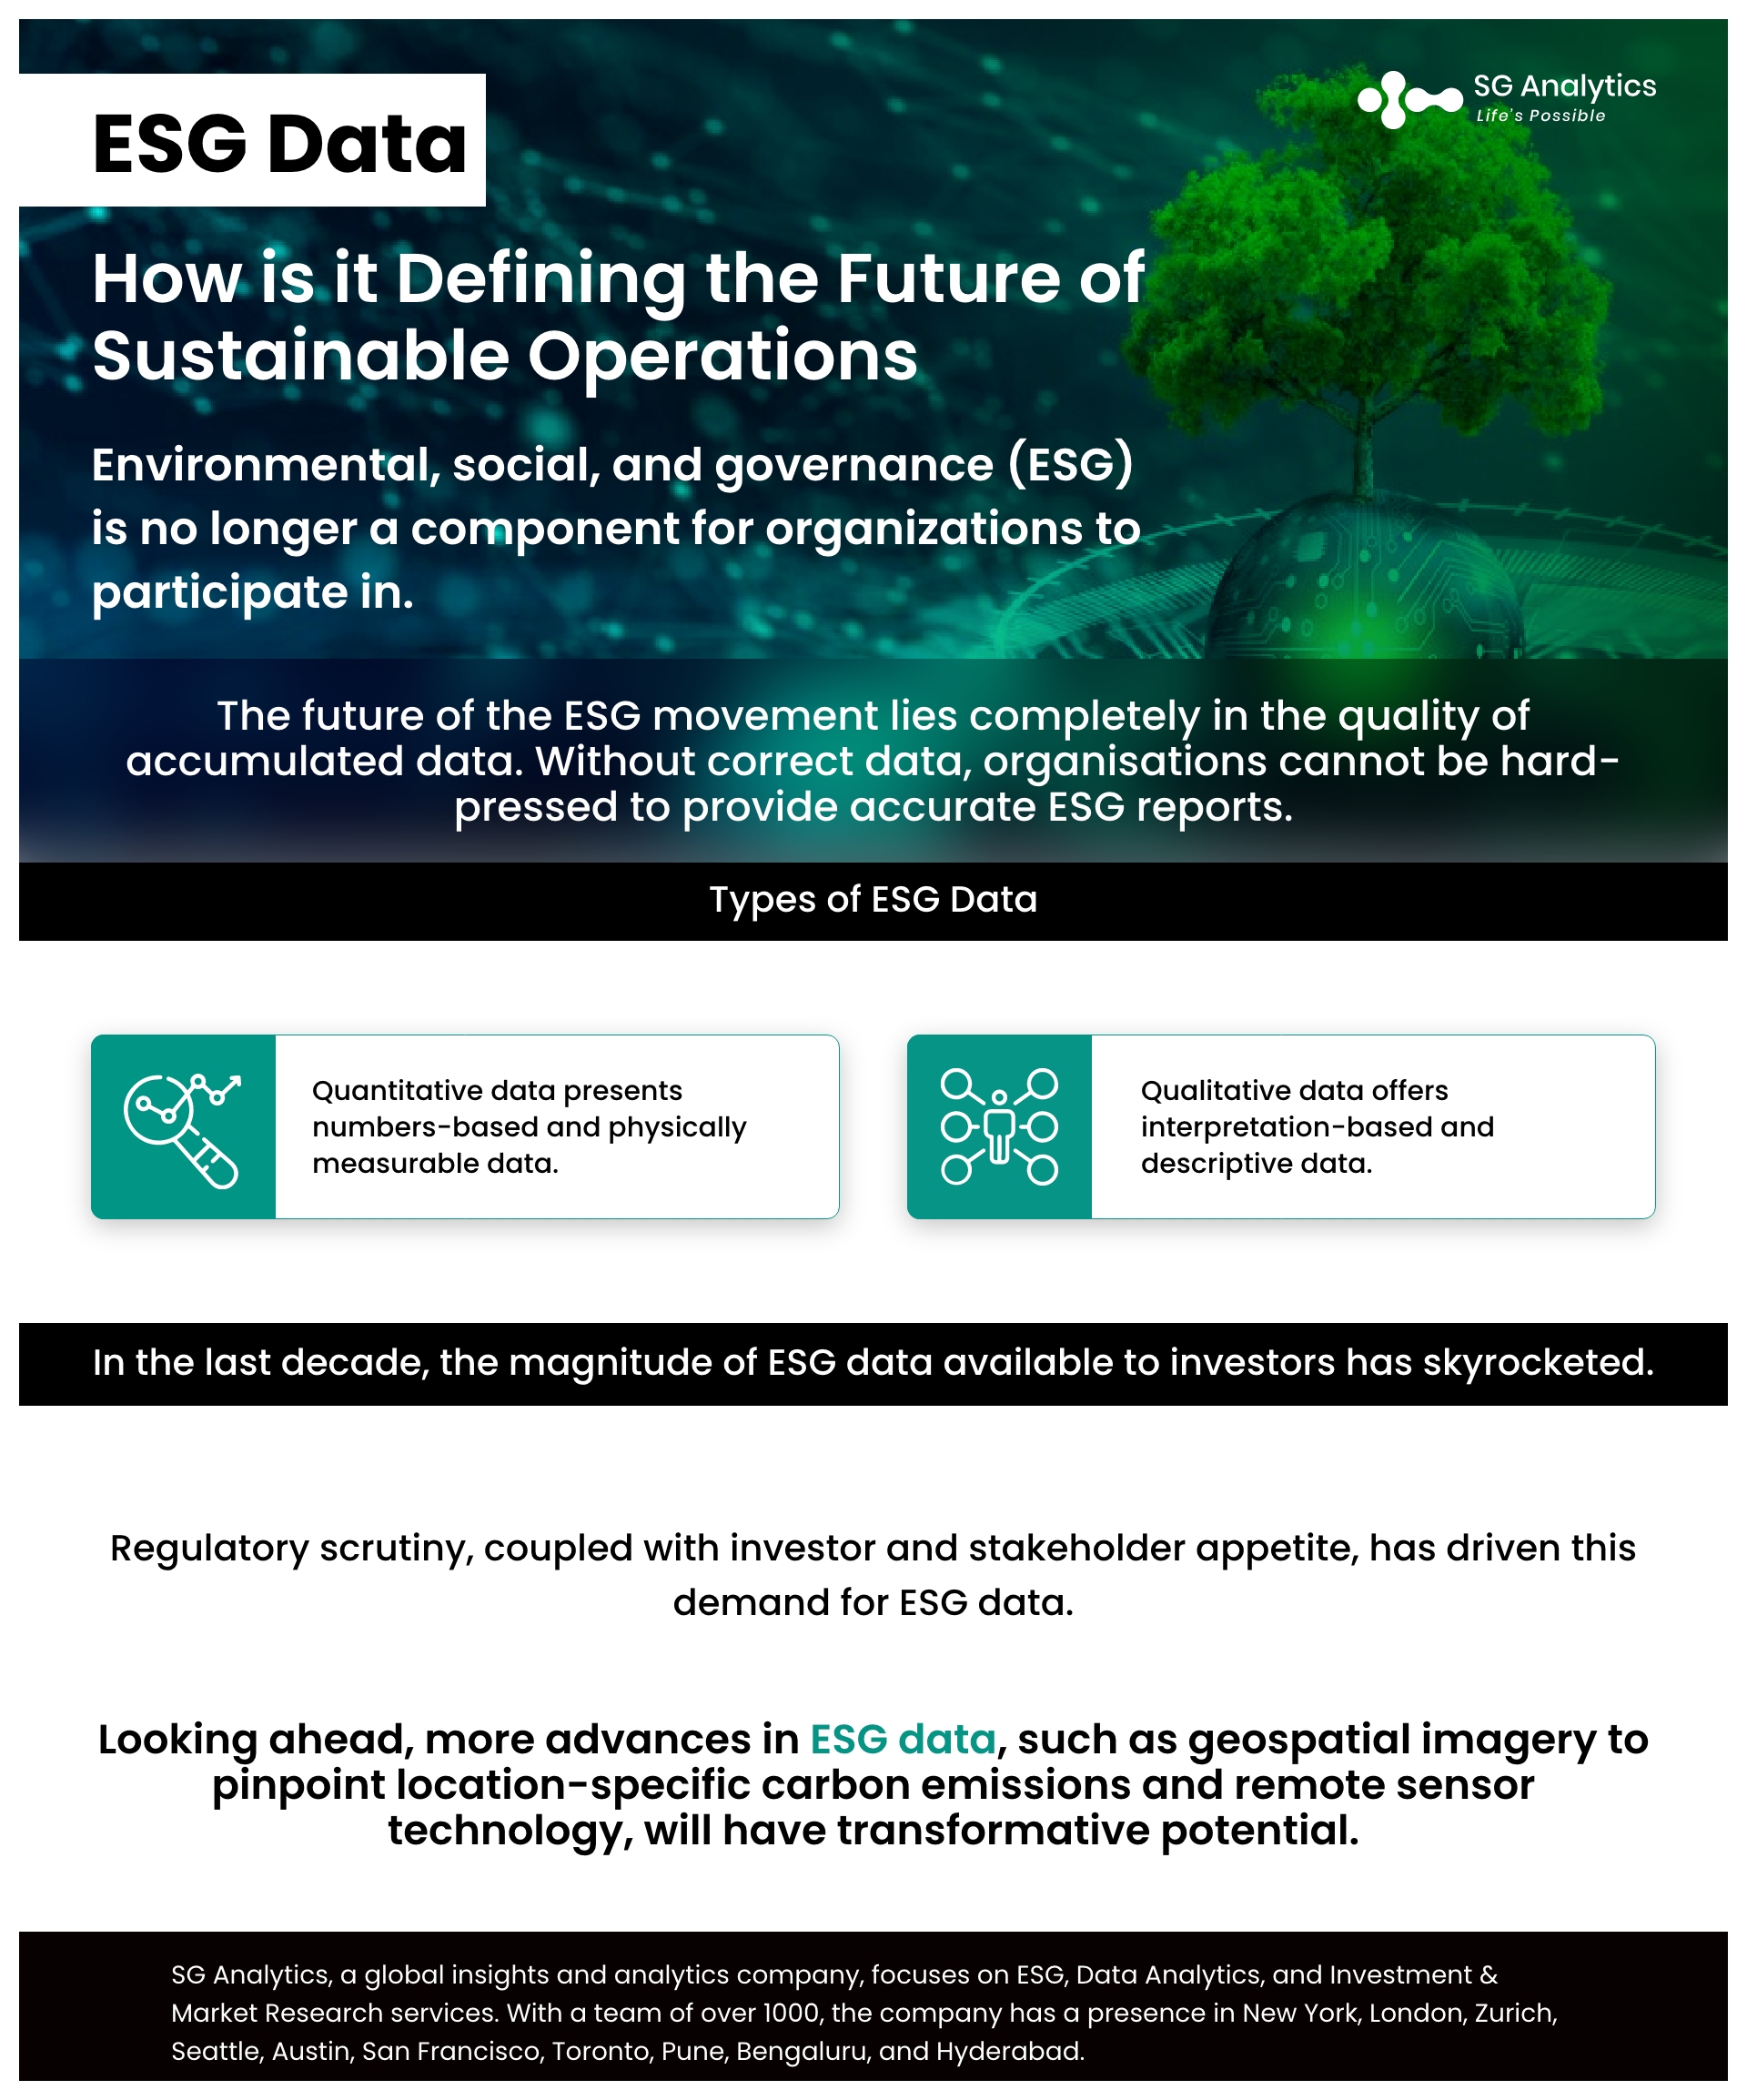 ESG Data - How is it Defining the Future of Sustainable Operations